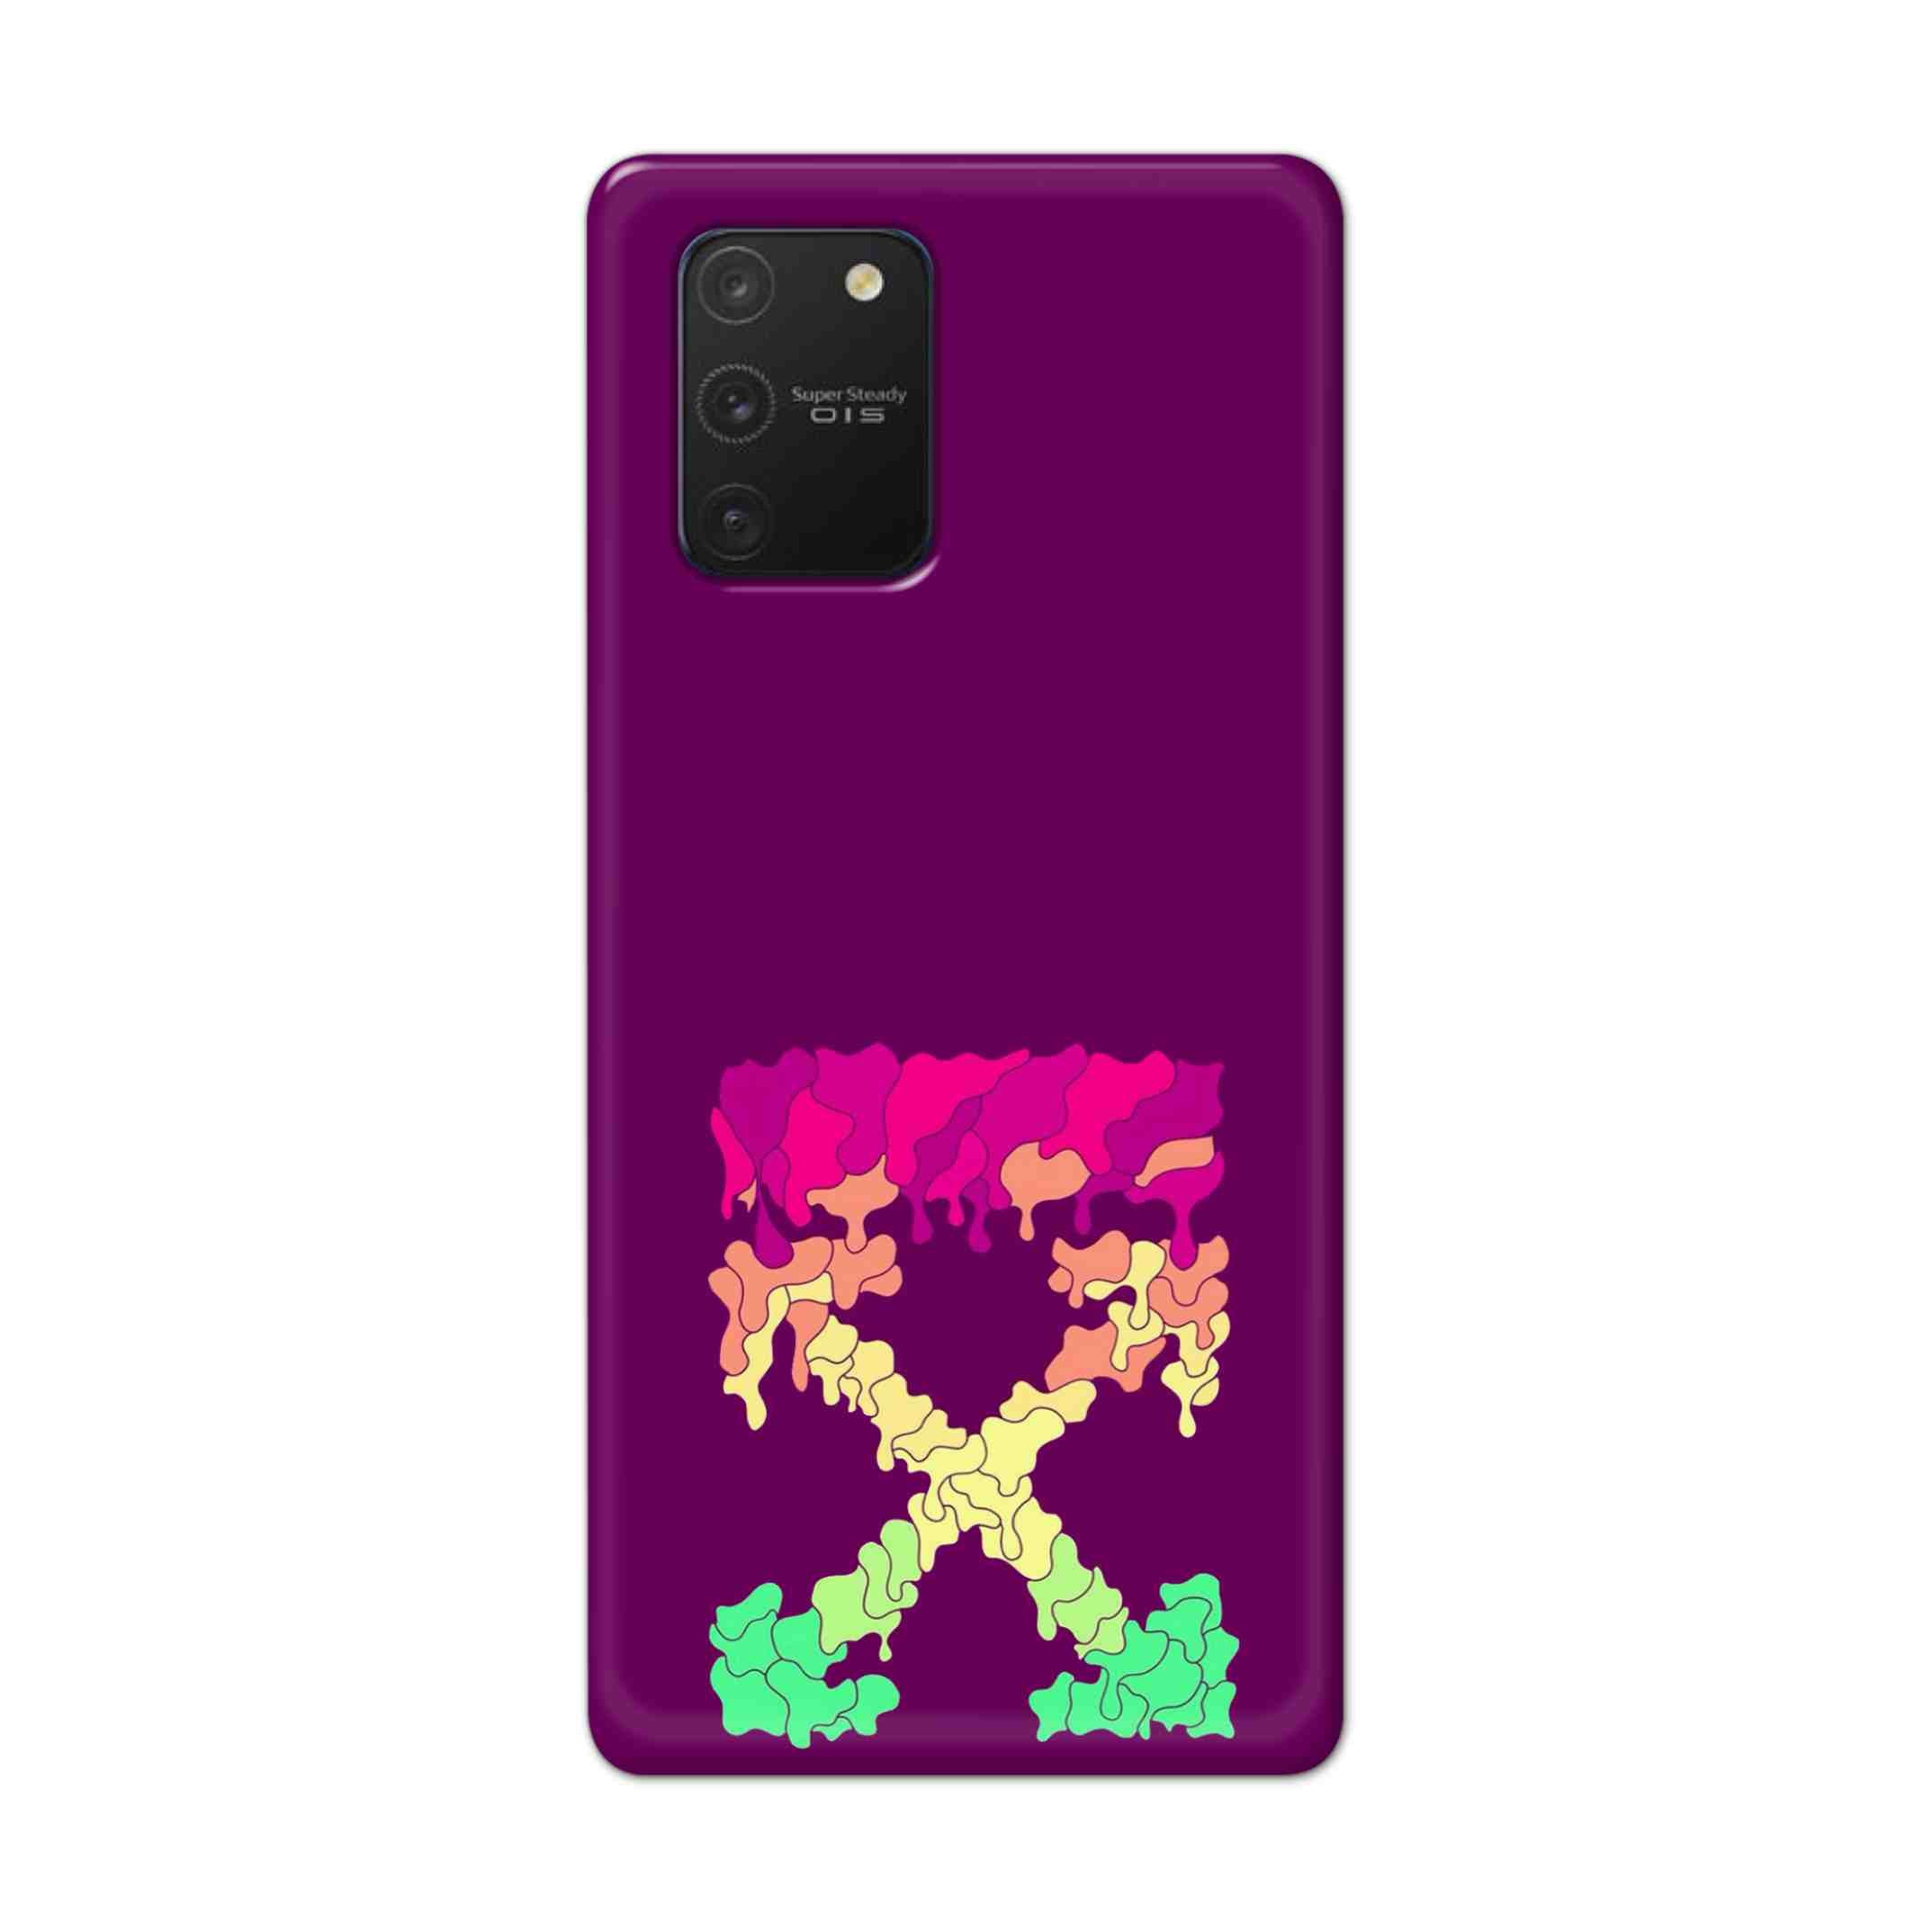 Buy X.O Hard Back Mobile Phone Case Cover For Samsung Galaxy S10 Lite Online